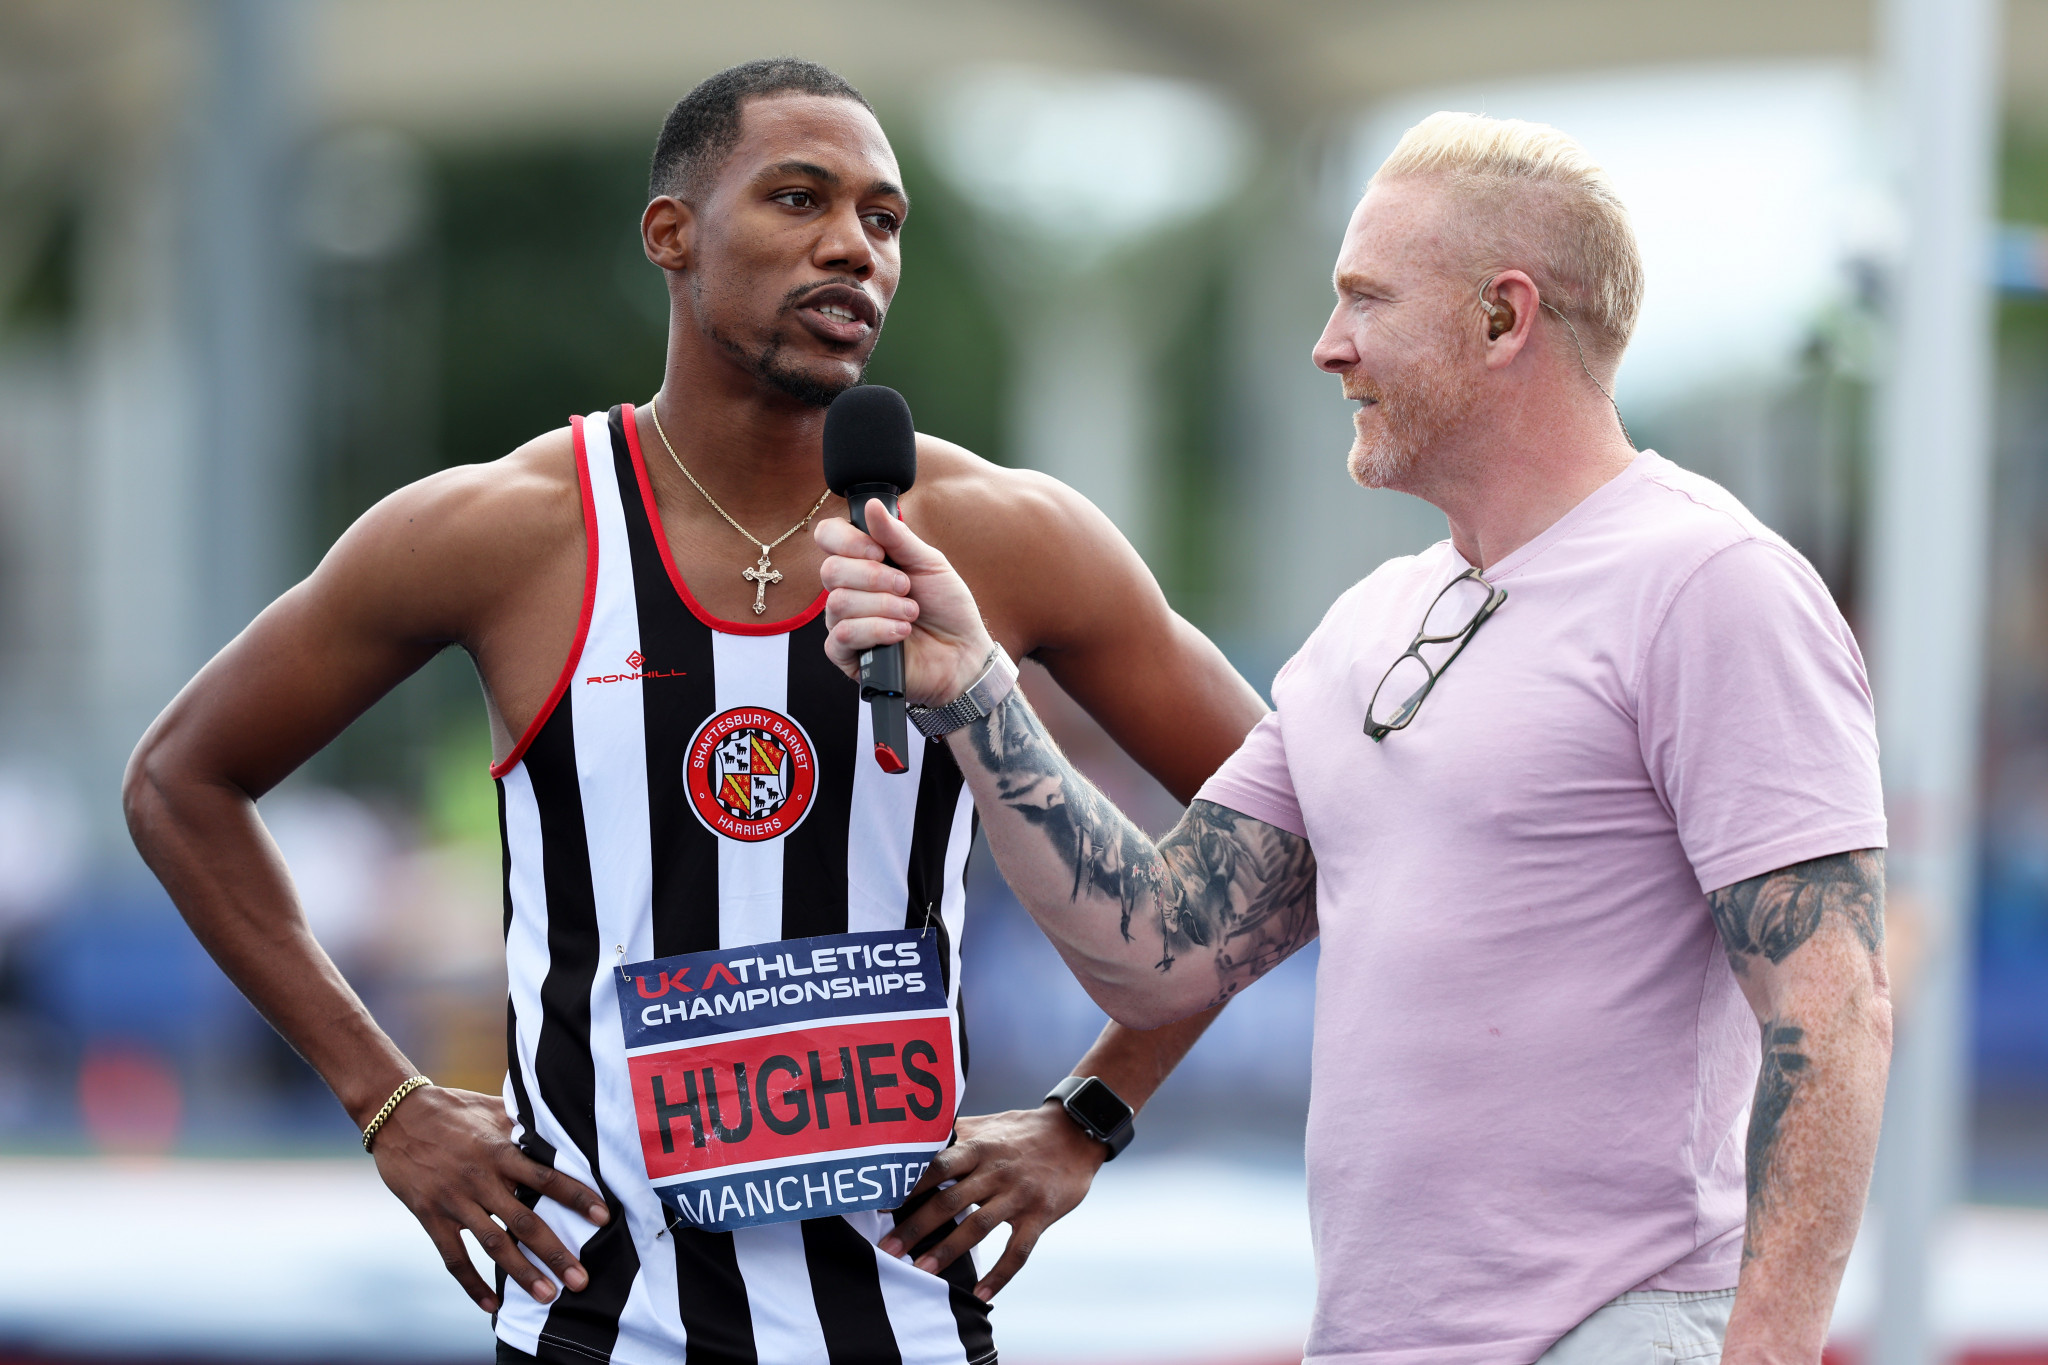 Zharnel Hughes is interviewed by the author at the British Championships, where he completed the 100m and 200m double ©Getty Images